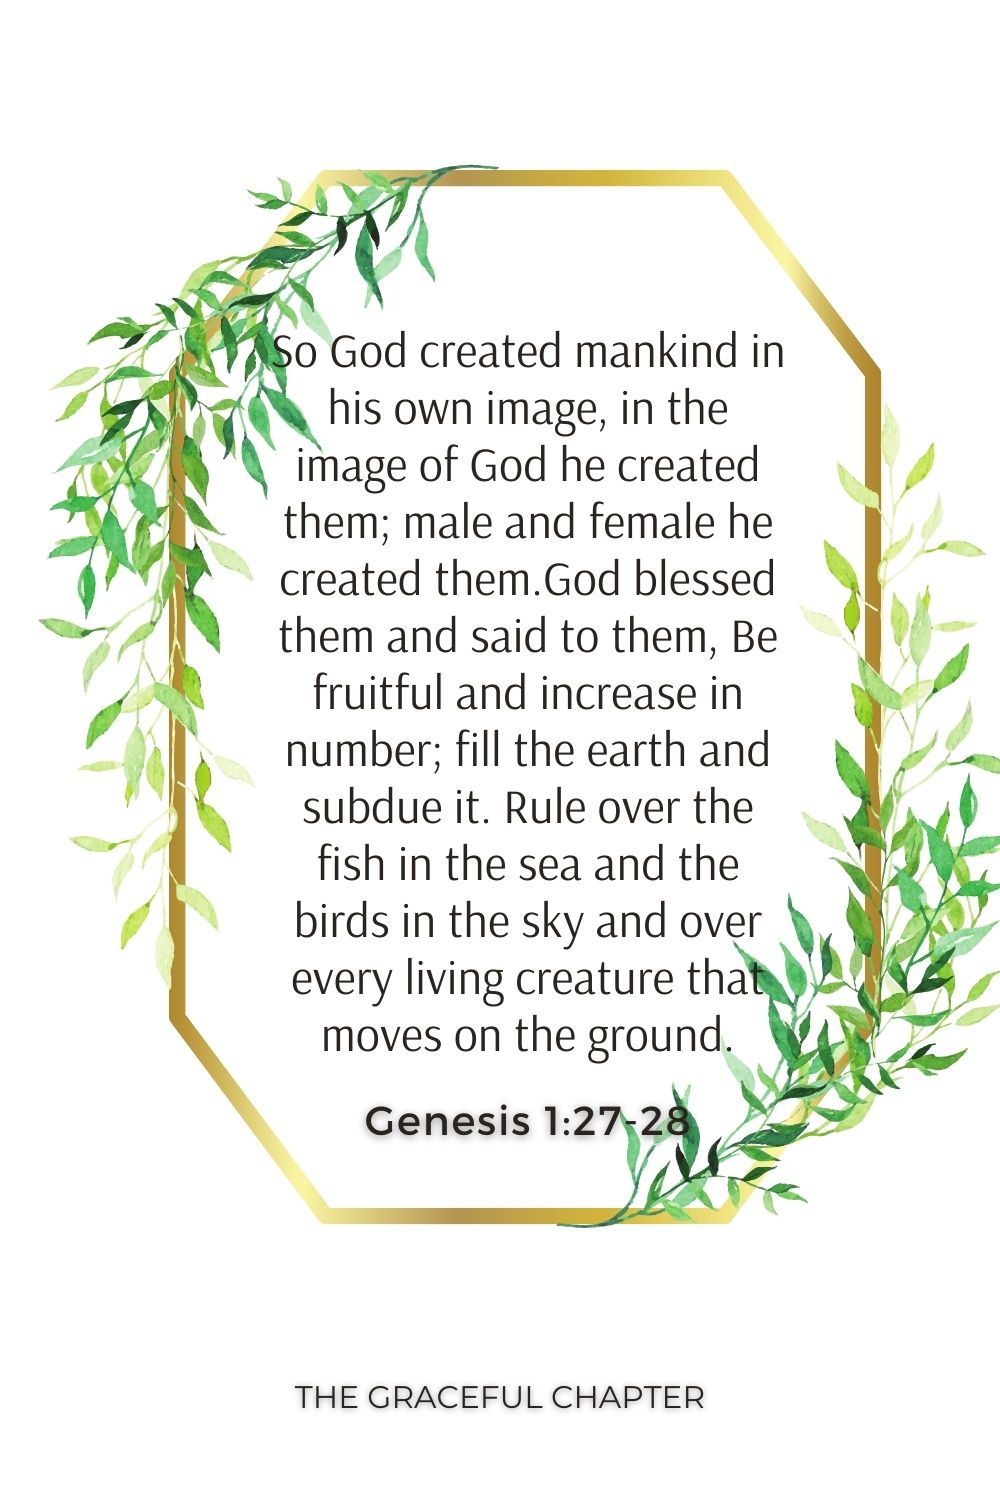 So God created mankind in his own image, in the image of God he created them; male and female he created them.God blessed them and said to them, Be fruitful and increase in number; fill the earth and subdue it. Rule over the fish in the sea and the birds in the sky and over every living creature that moves on the ground. Genesis 1:27-28